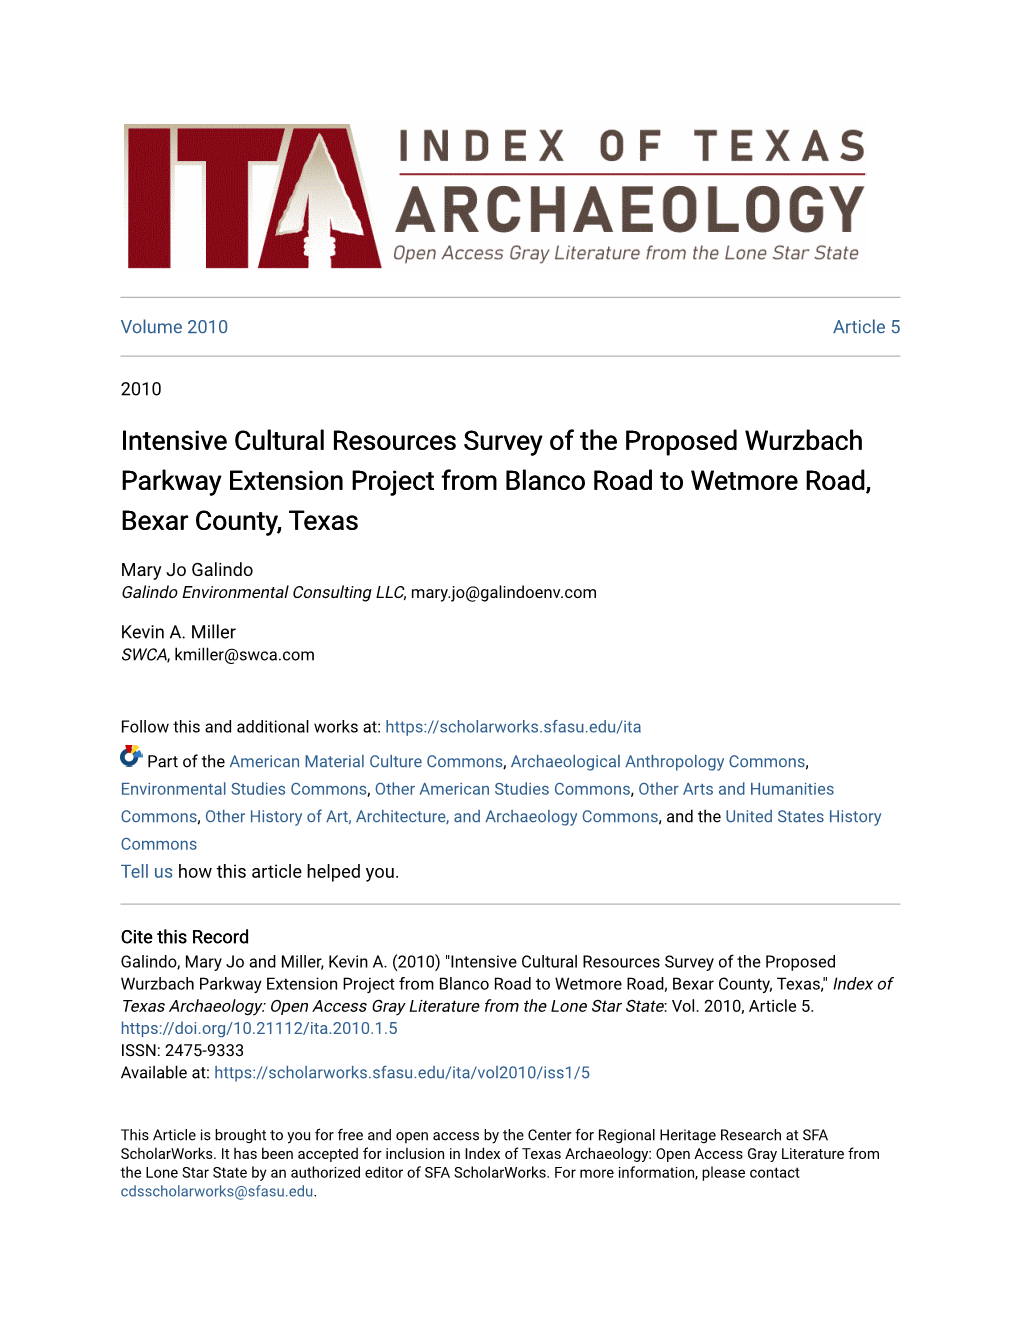 Intensive Cultural Resources Survey of the Proposed Wurzbach Parkway Extension Project from Blanco Road to Wetmore Road, Bexar County, Texas